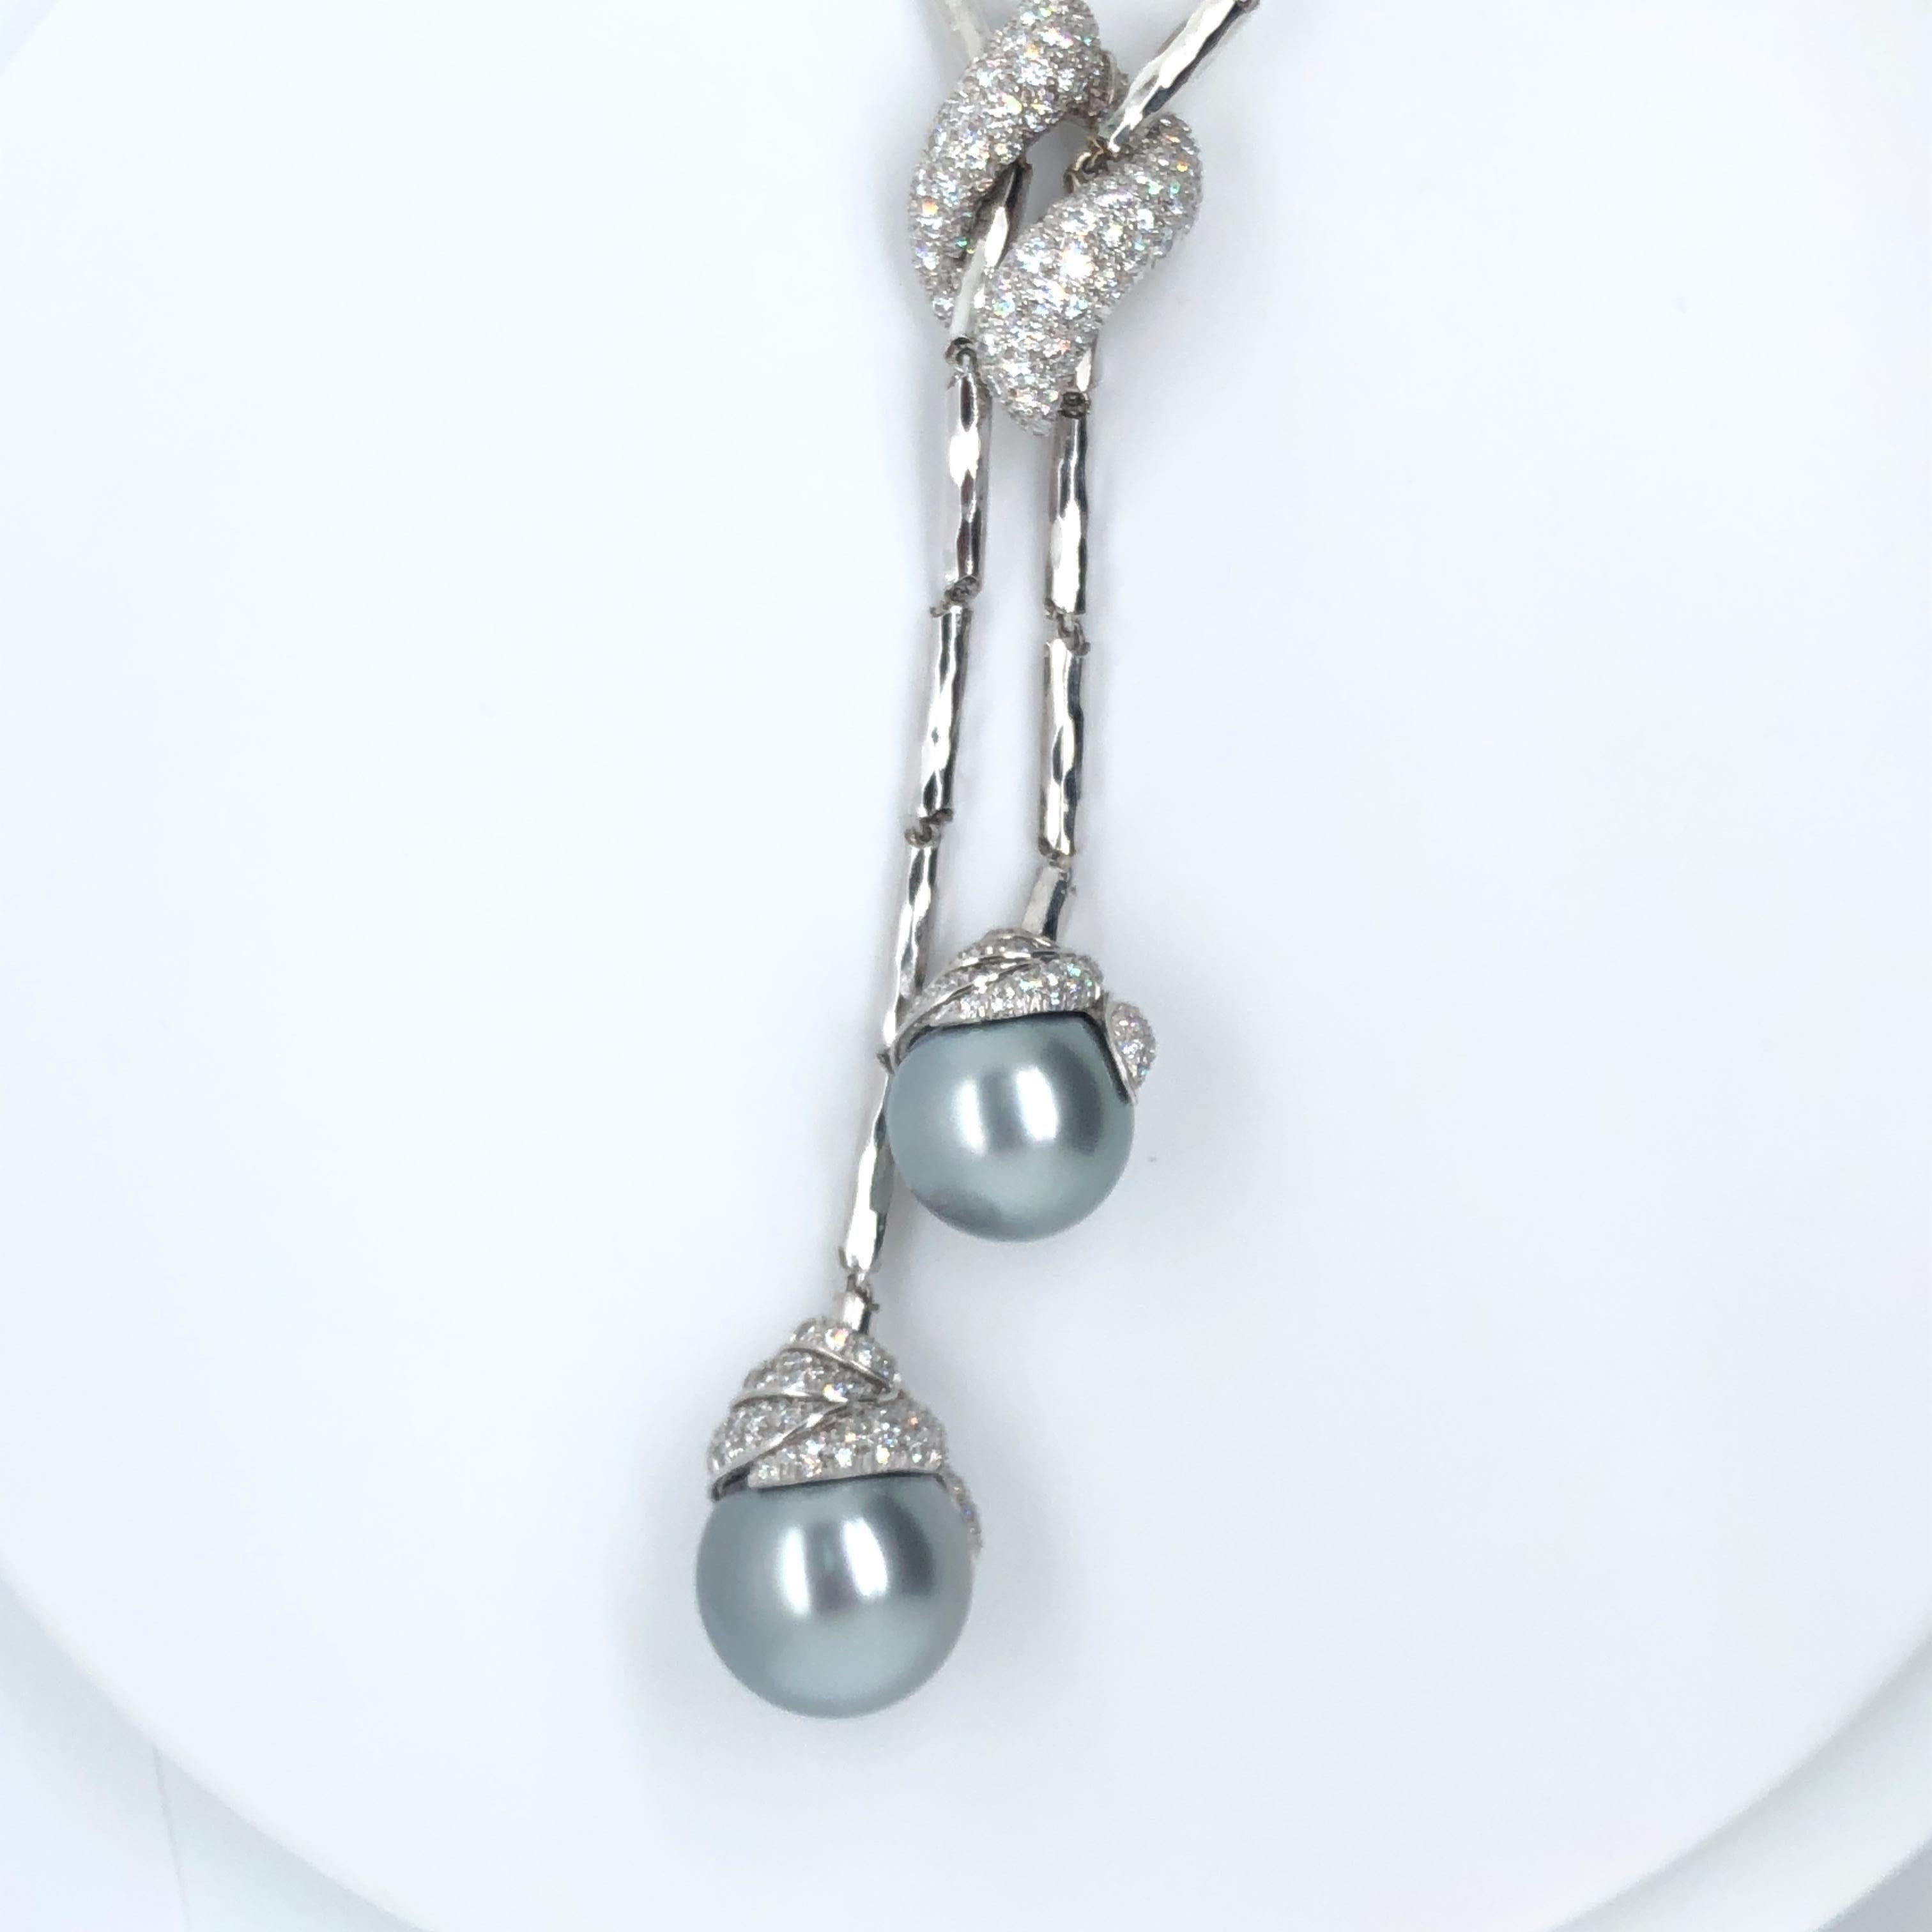 This elegant, ~18.5 inch 'hammered' platinum necklace by acclaimed designer Henry Dunay drapes beautifully when worn, centered by two Tahitian pearls that dangle with designed asymmetry.  This necklace - which essentially received its own entire